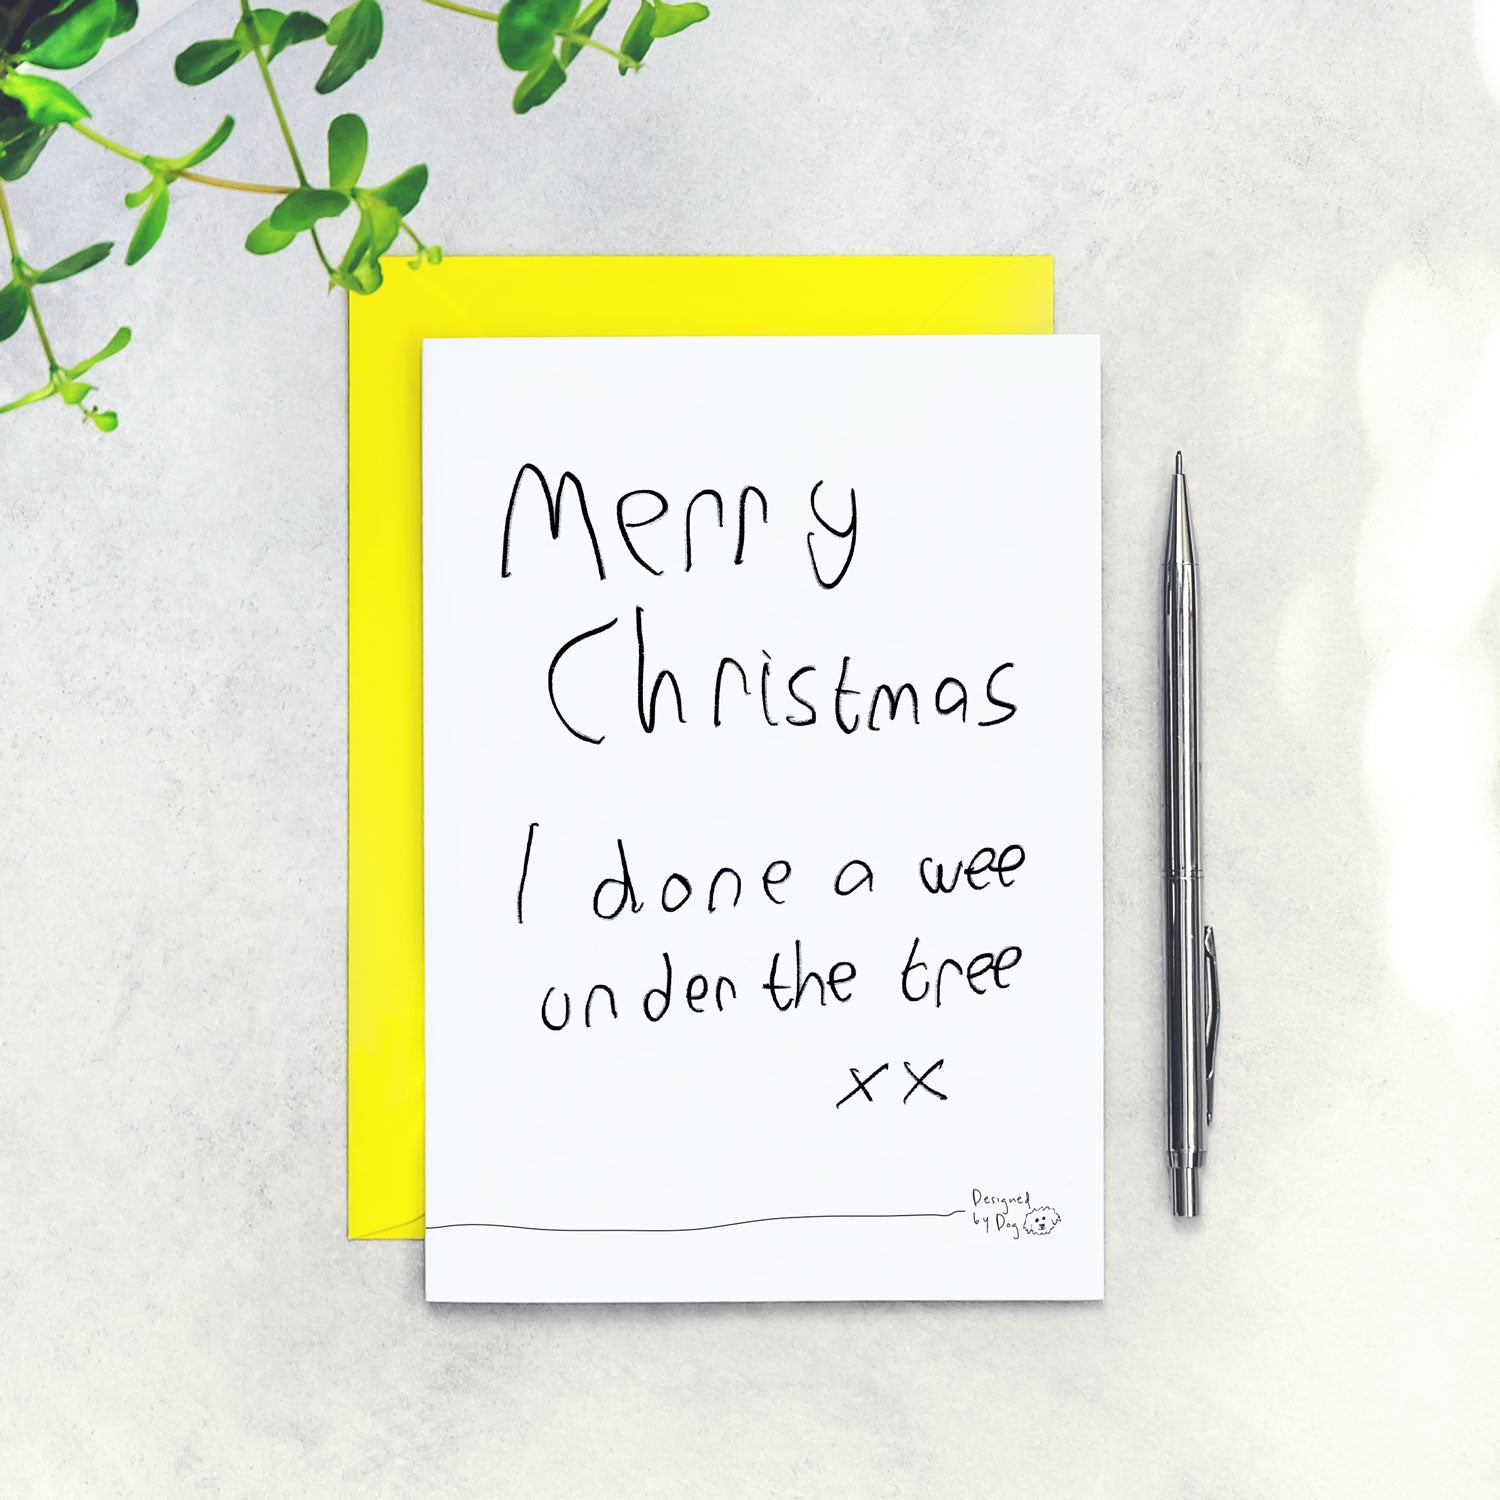 Christmas Cards - Paper Plane